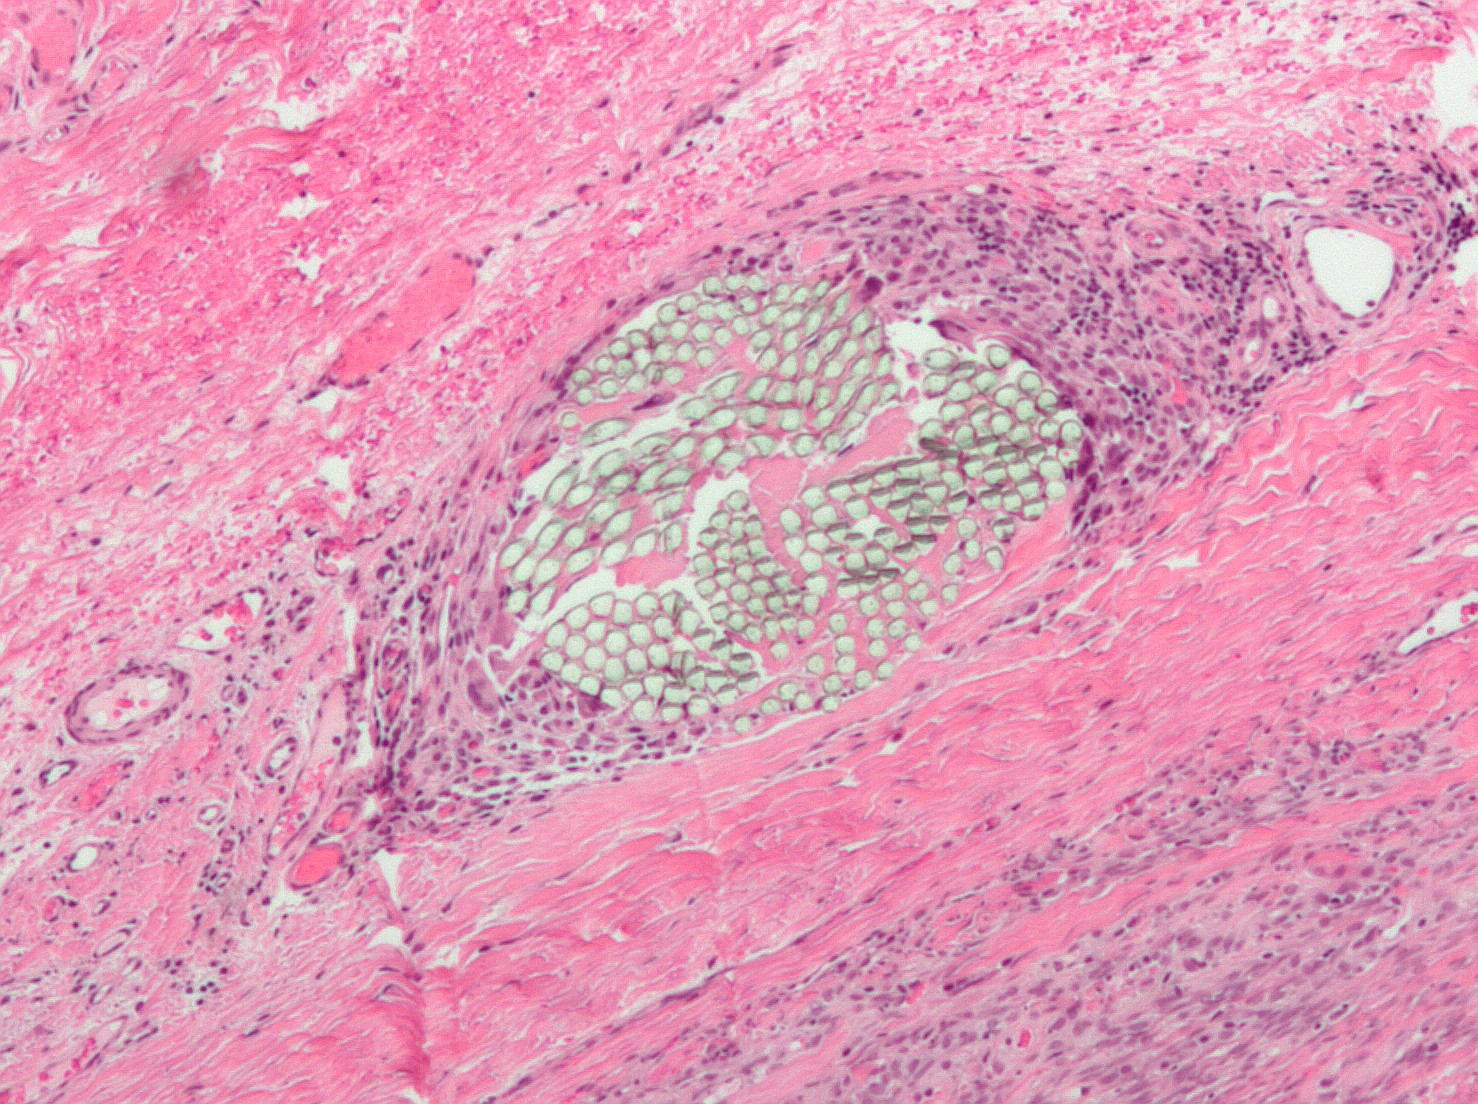 Foreign-body giant cell reaction to a suture. H&E stain.